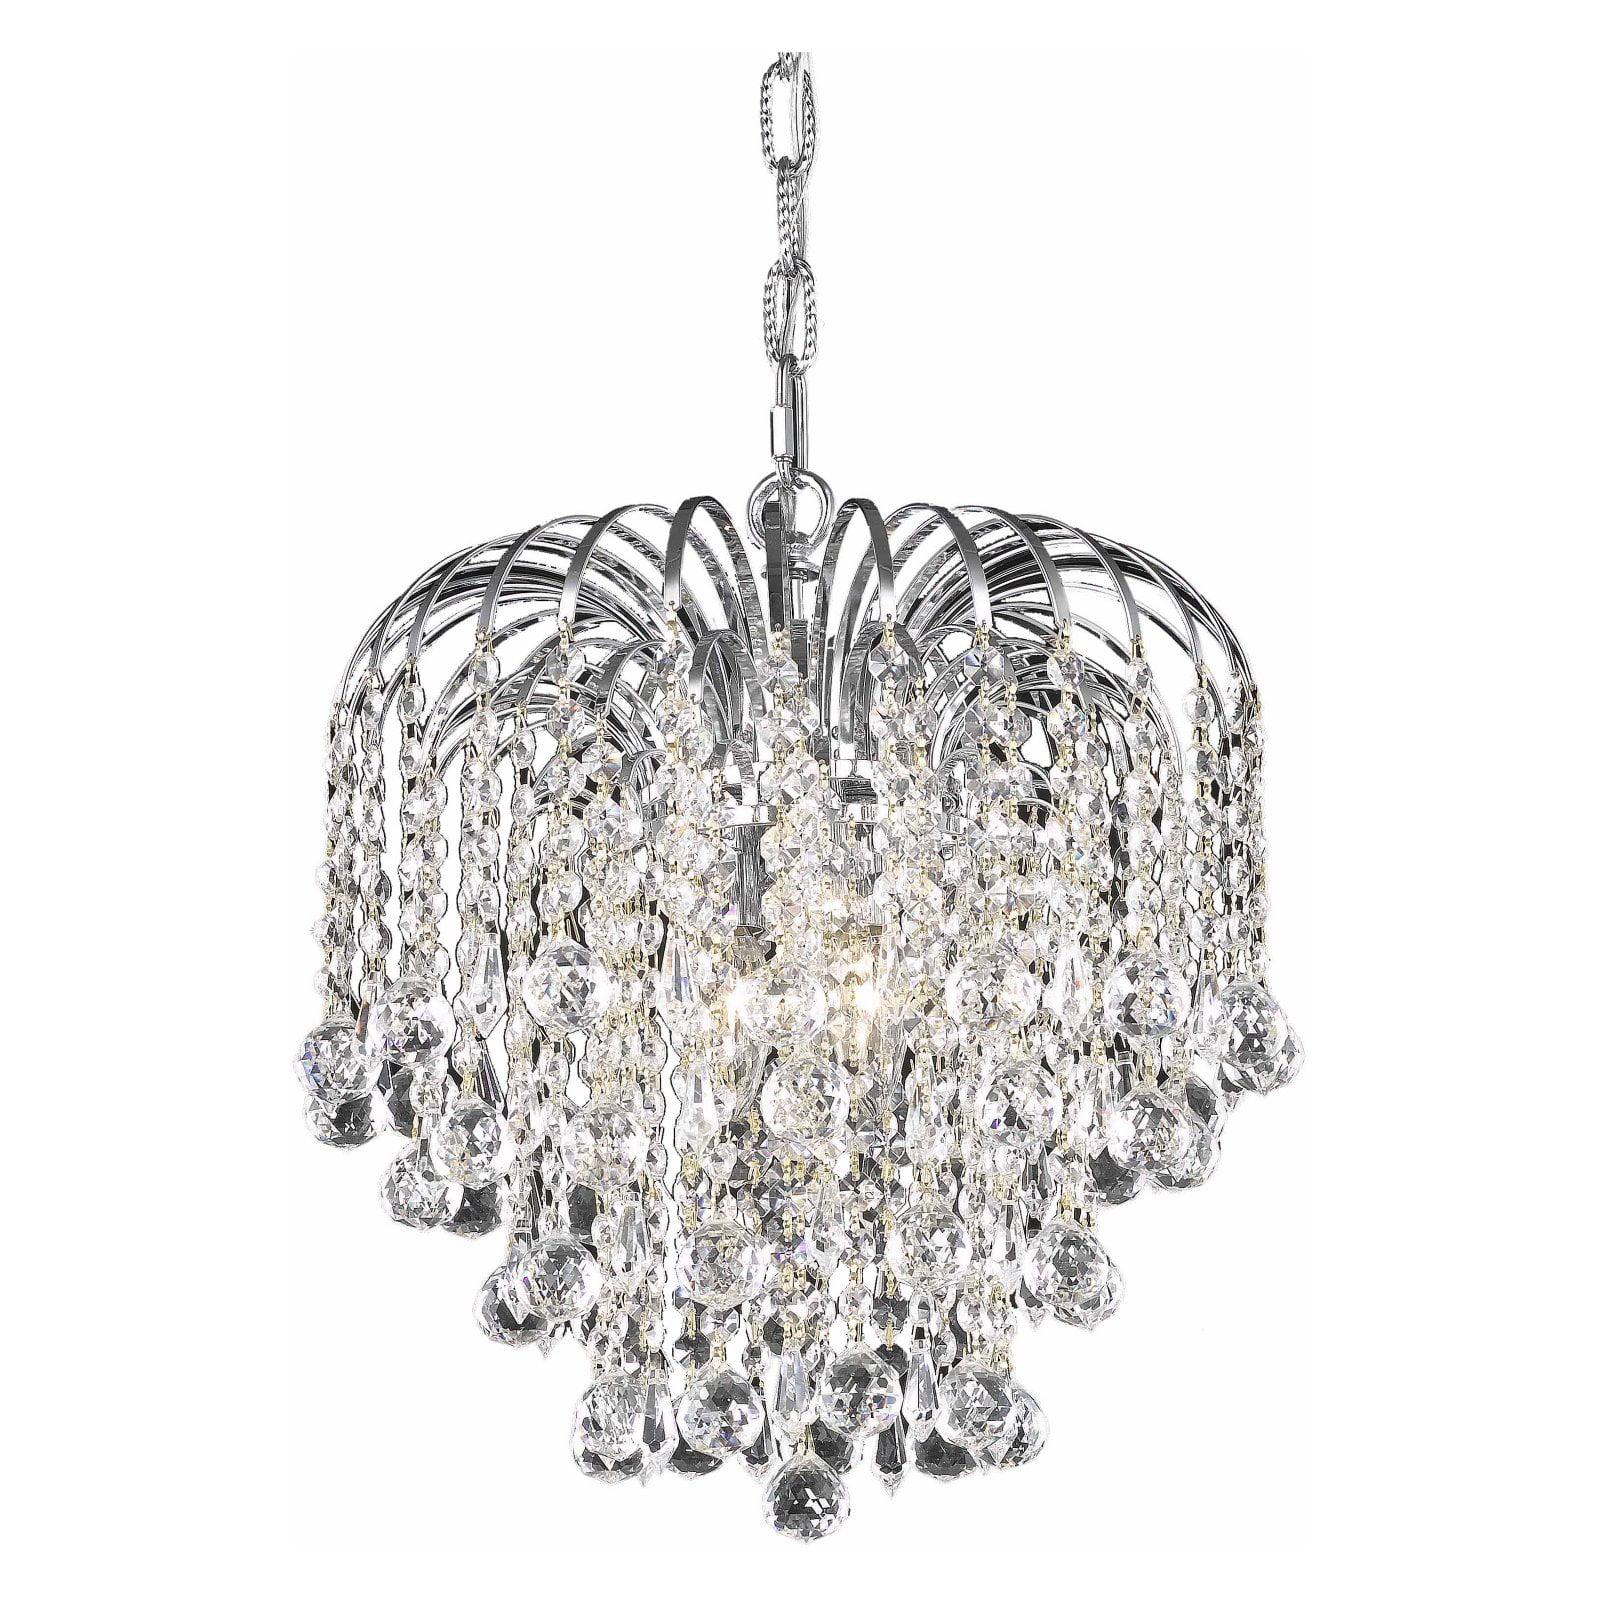 Transitional Addison 3-Light Chrome Pendant with Royal Cut Crystals